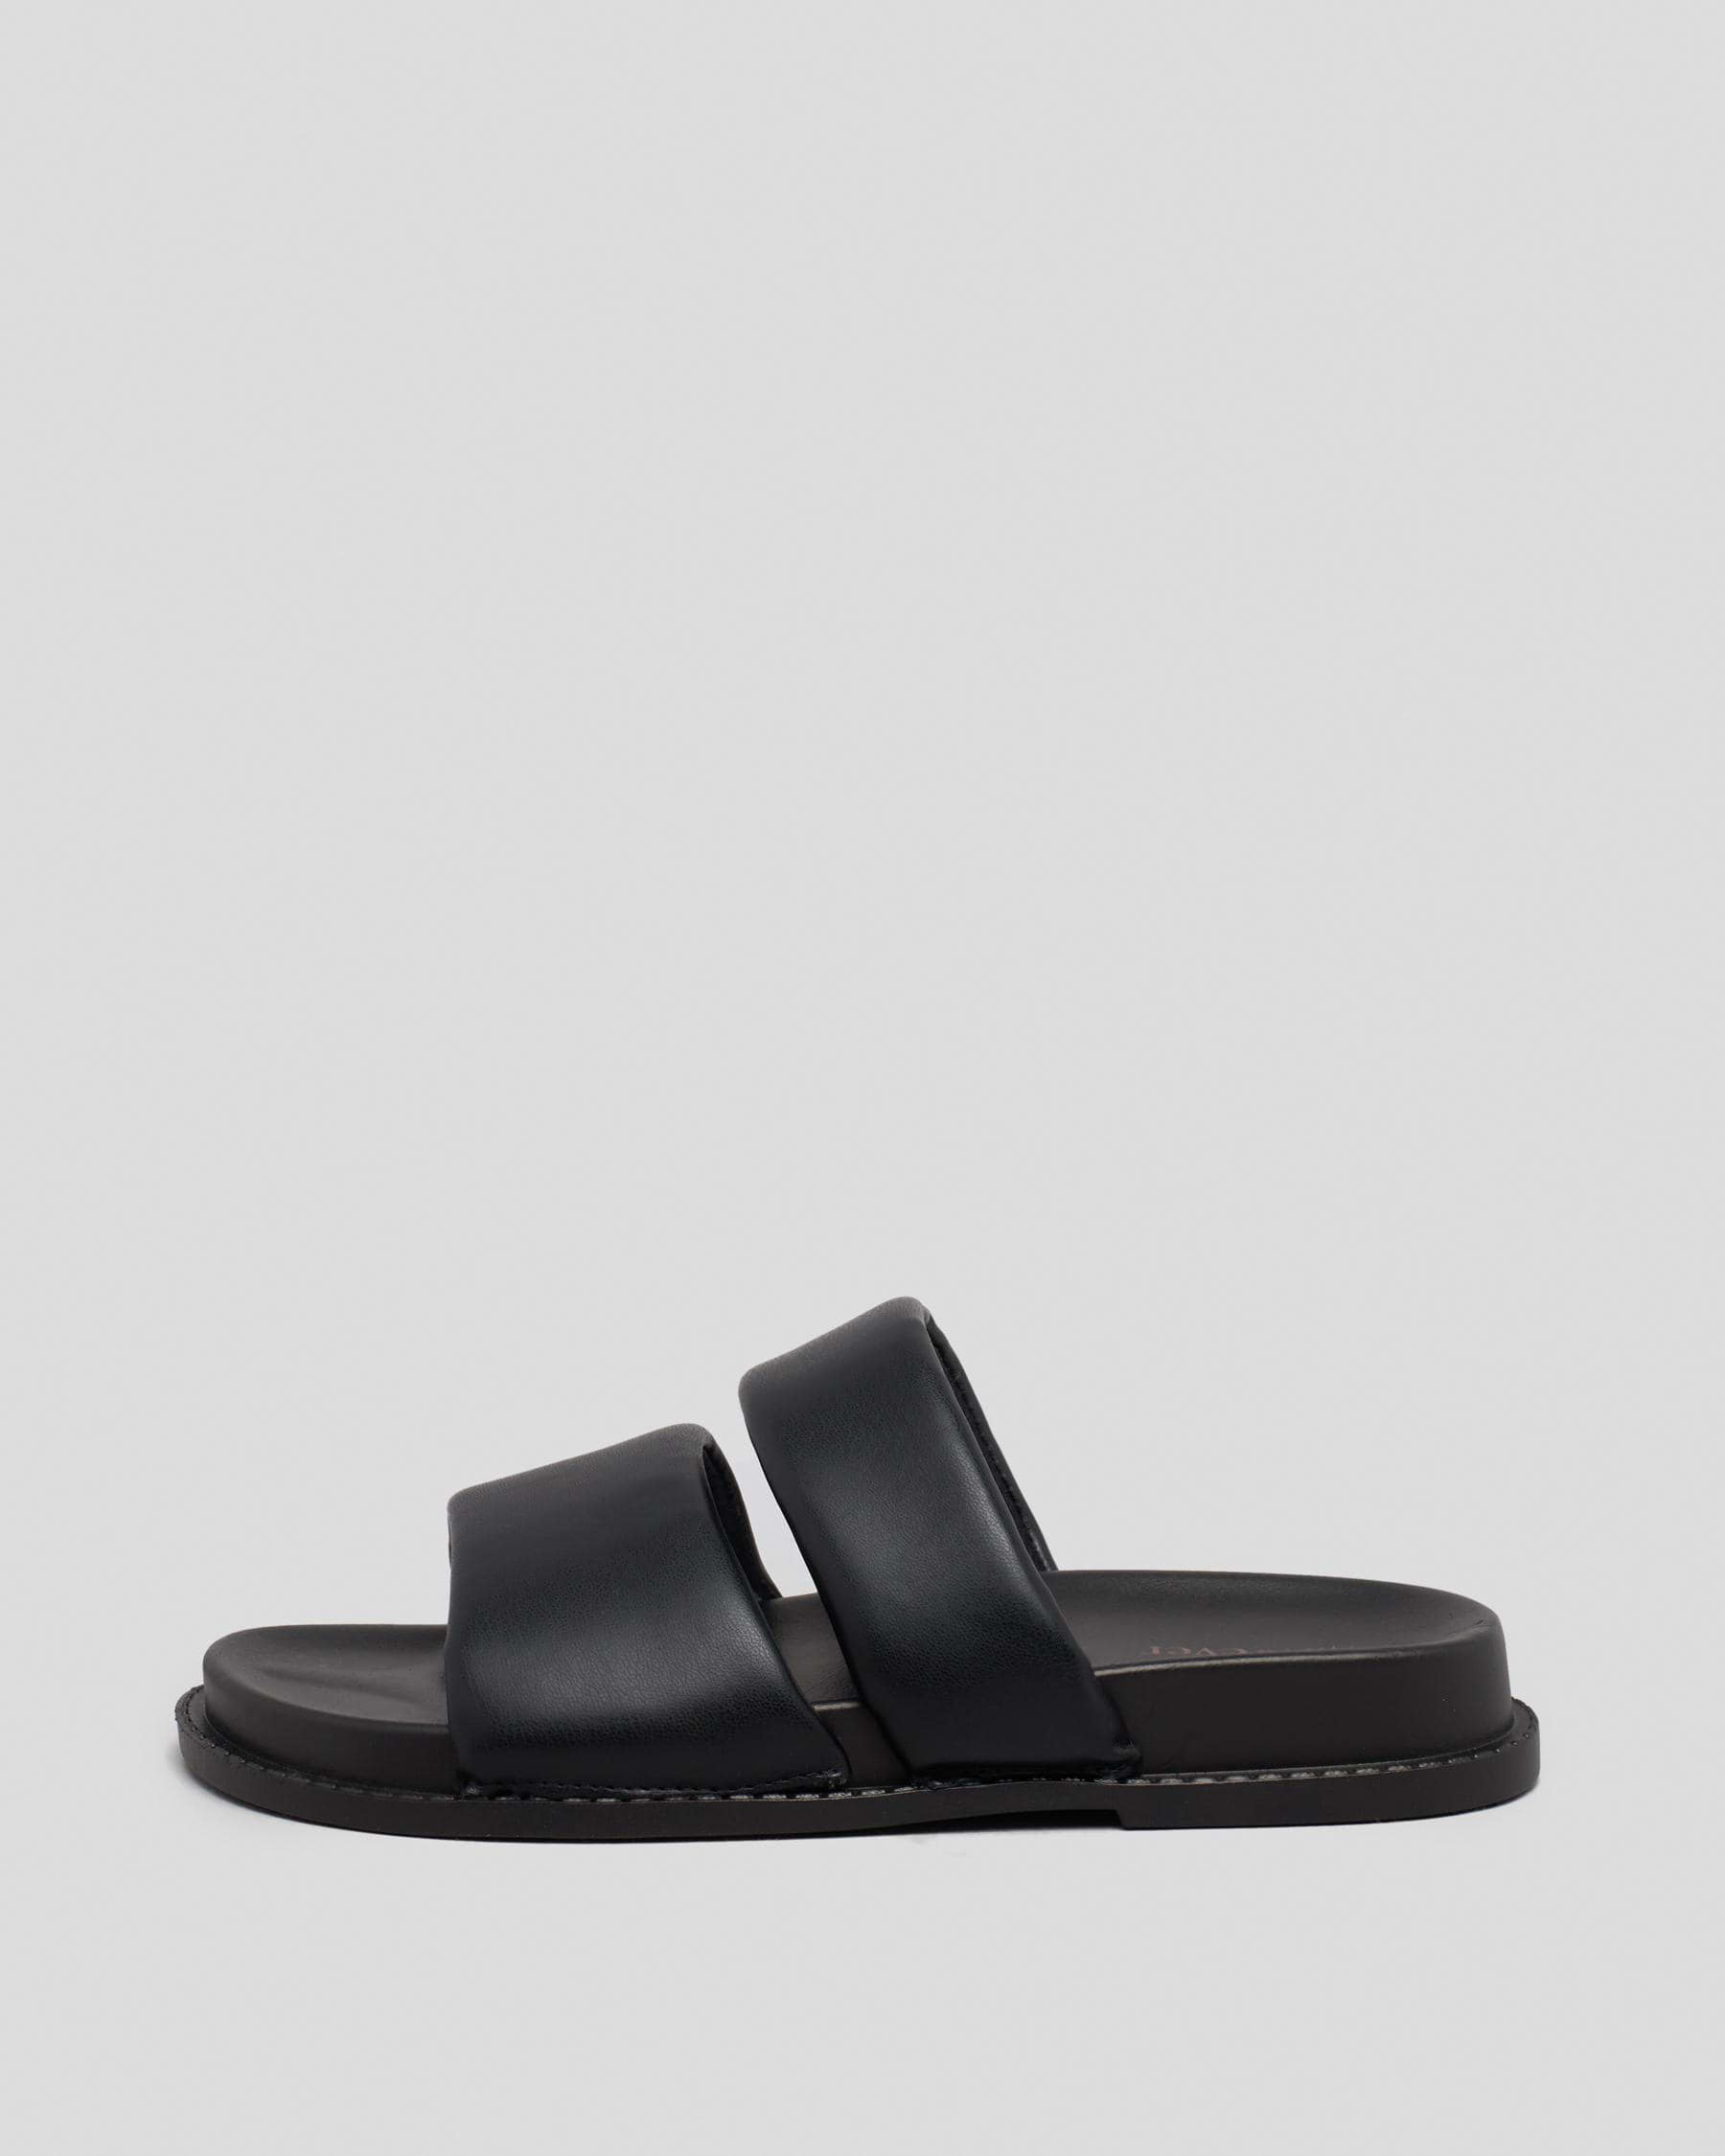 Ava And Ever Ellie Slide Sandals In Black - Fast Shipping & Easy ...